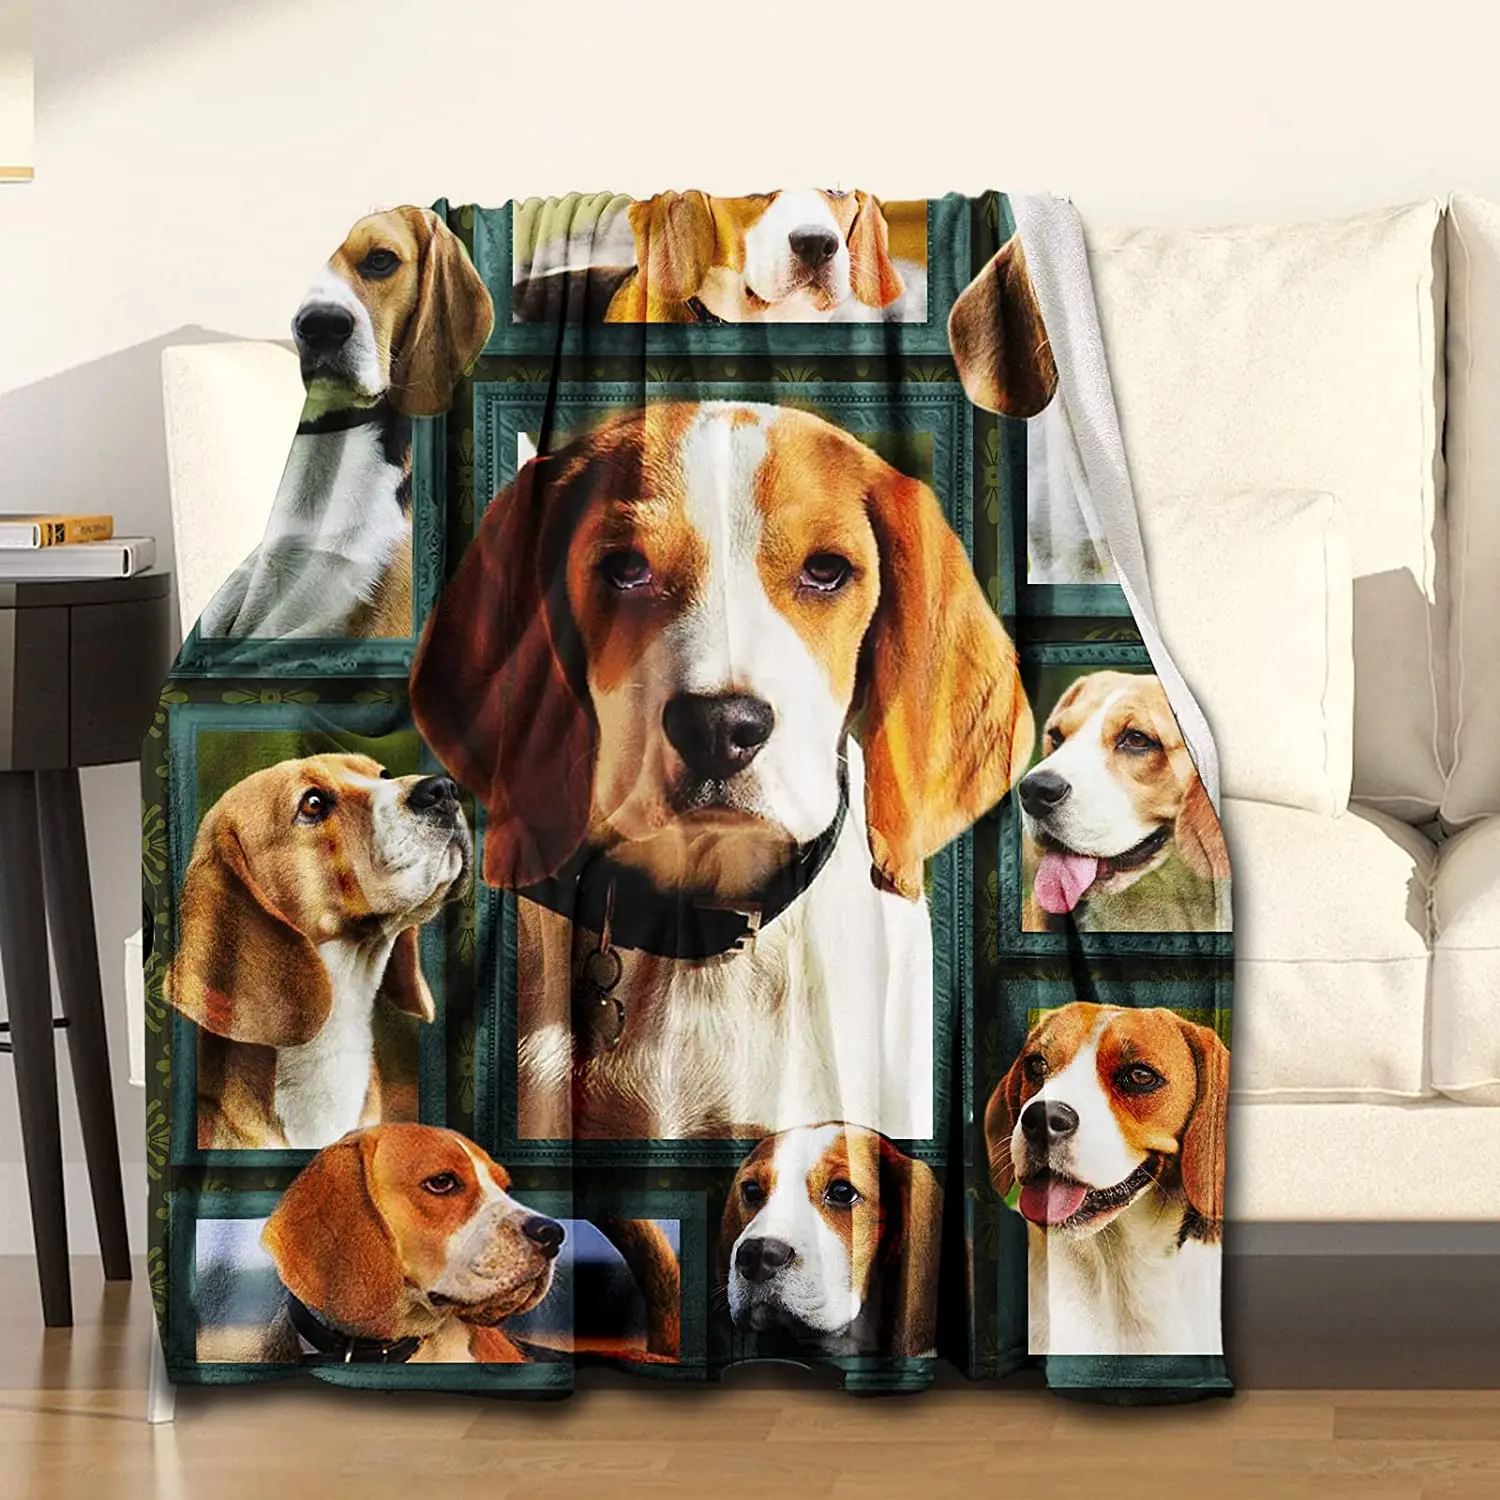 Beagle Dog Blanket Throw Flannel Fleece Blanket Super Soft Cozy Warm Blanket for Couch Chair Bed Sofa Office,50X60 inch for Teen